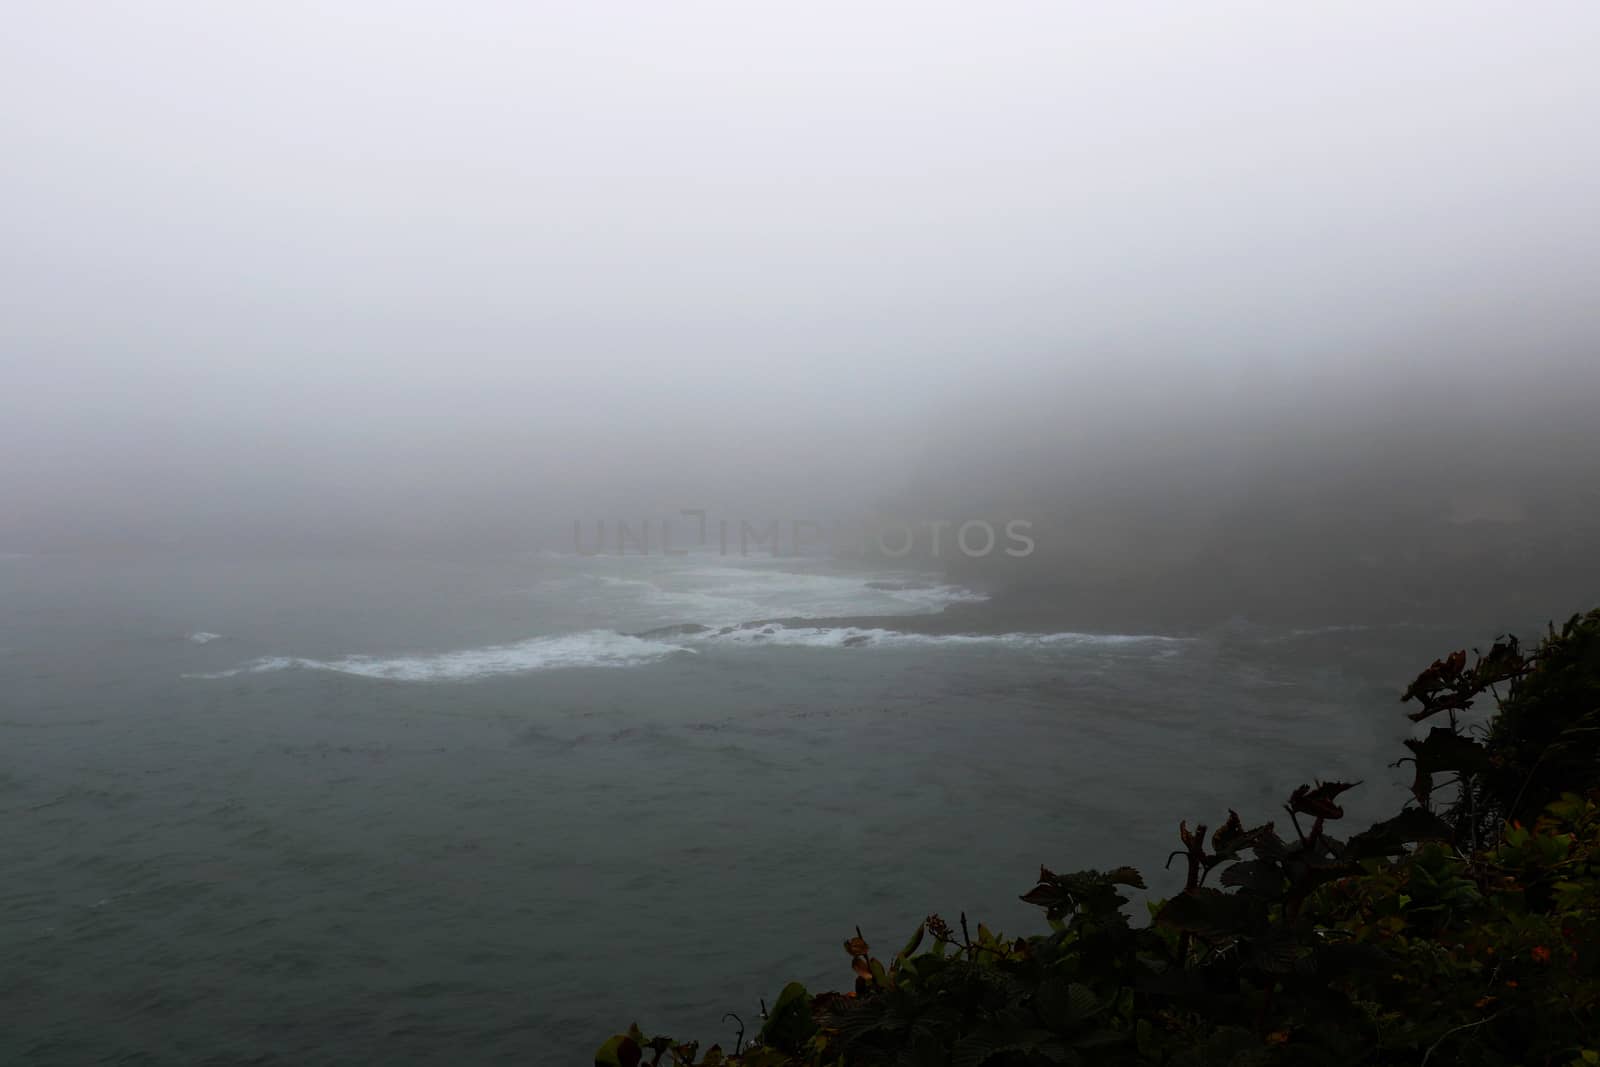 View of the Pacific Ocean in a foggy morning, America.